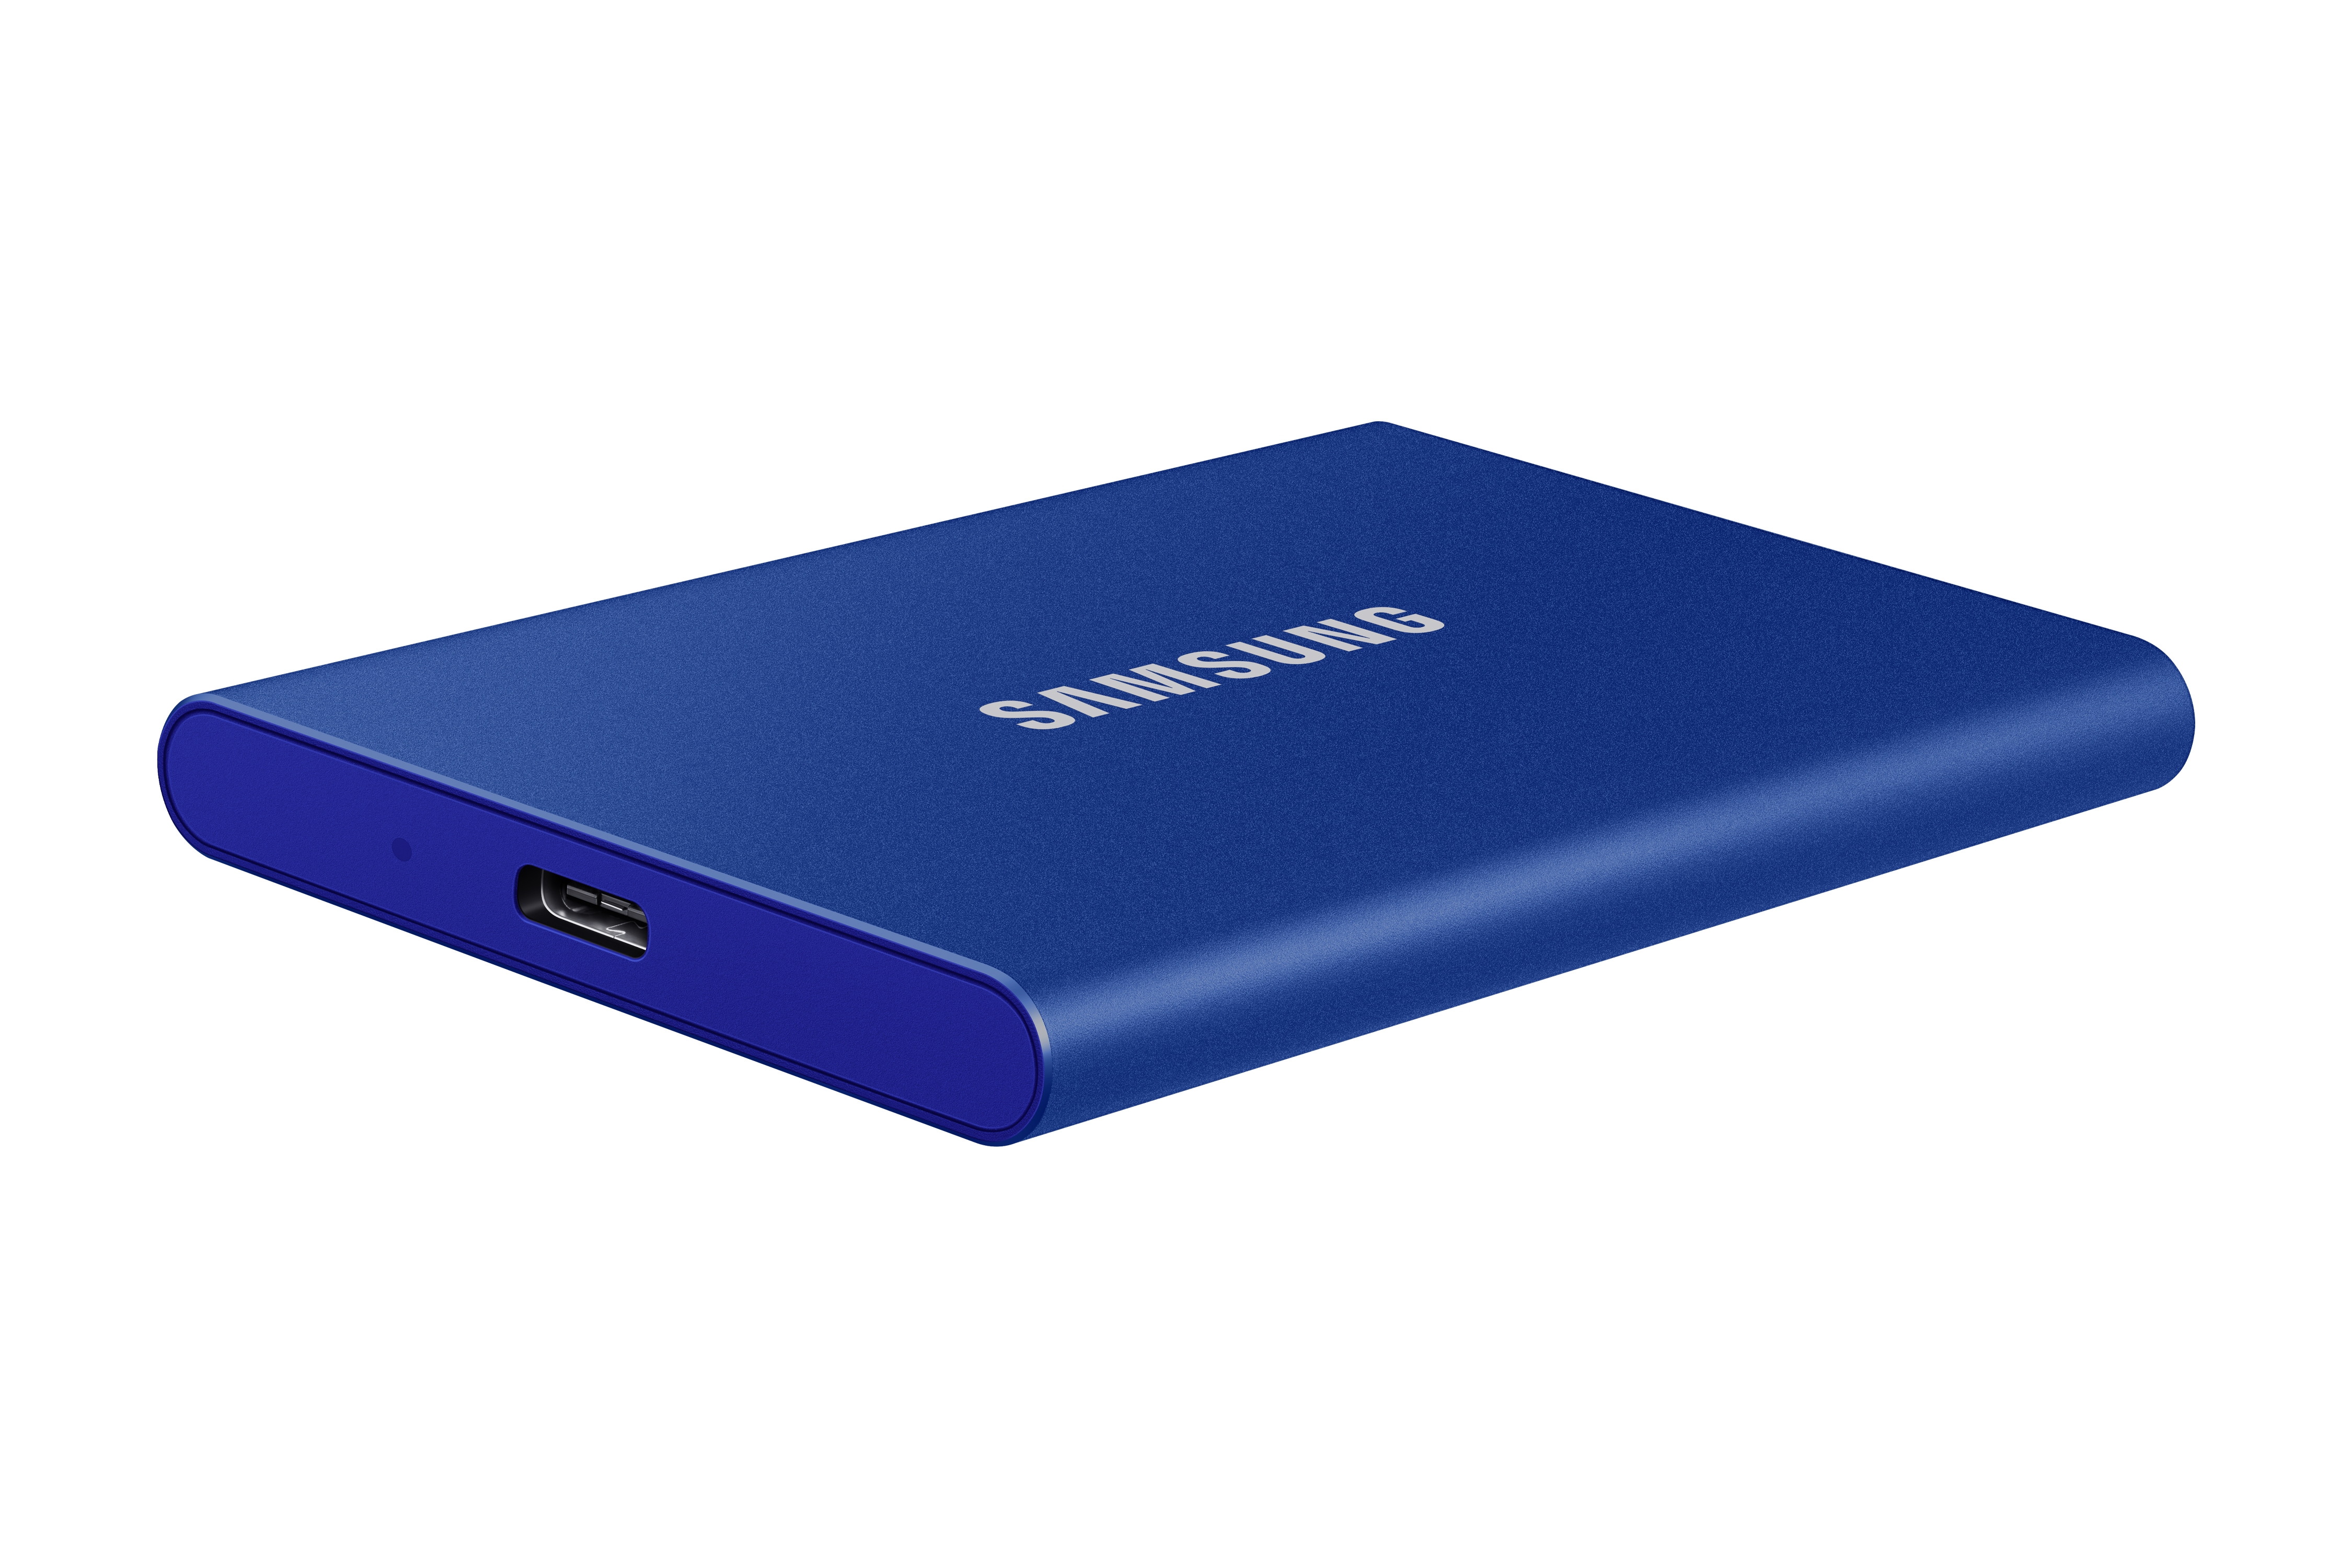 Best Portable SSD for Editing - Samsung T7 SSD Review